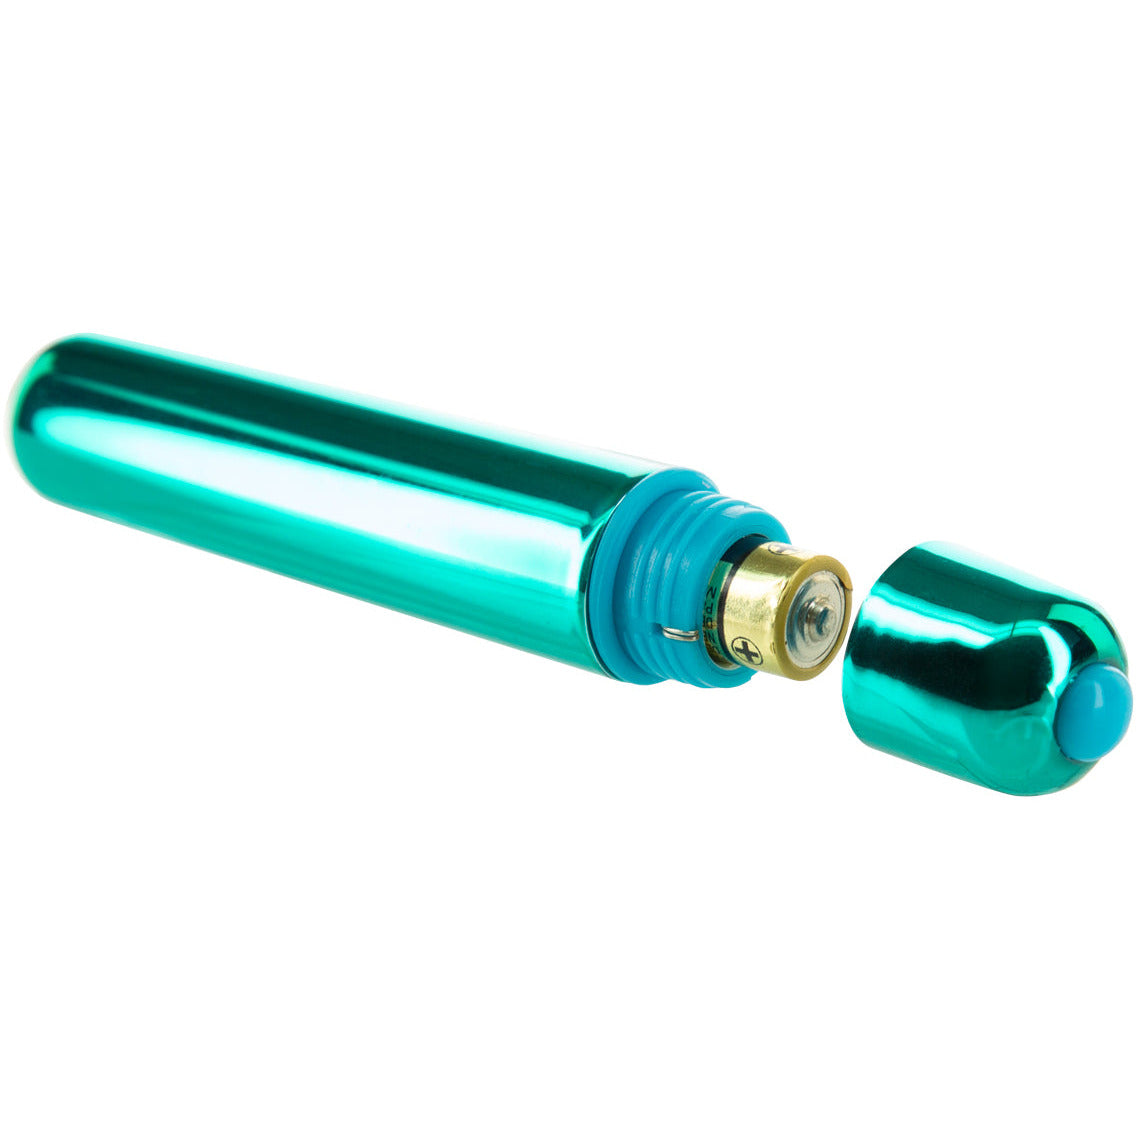 Pure Love® - Extended 3.5 in. 3-Speed Bullet – Teal